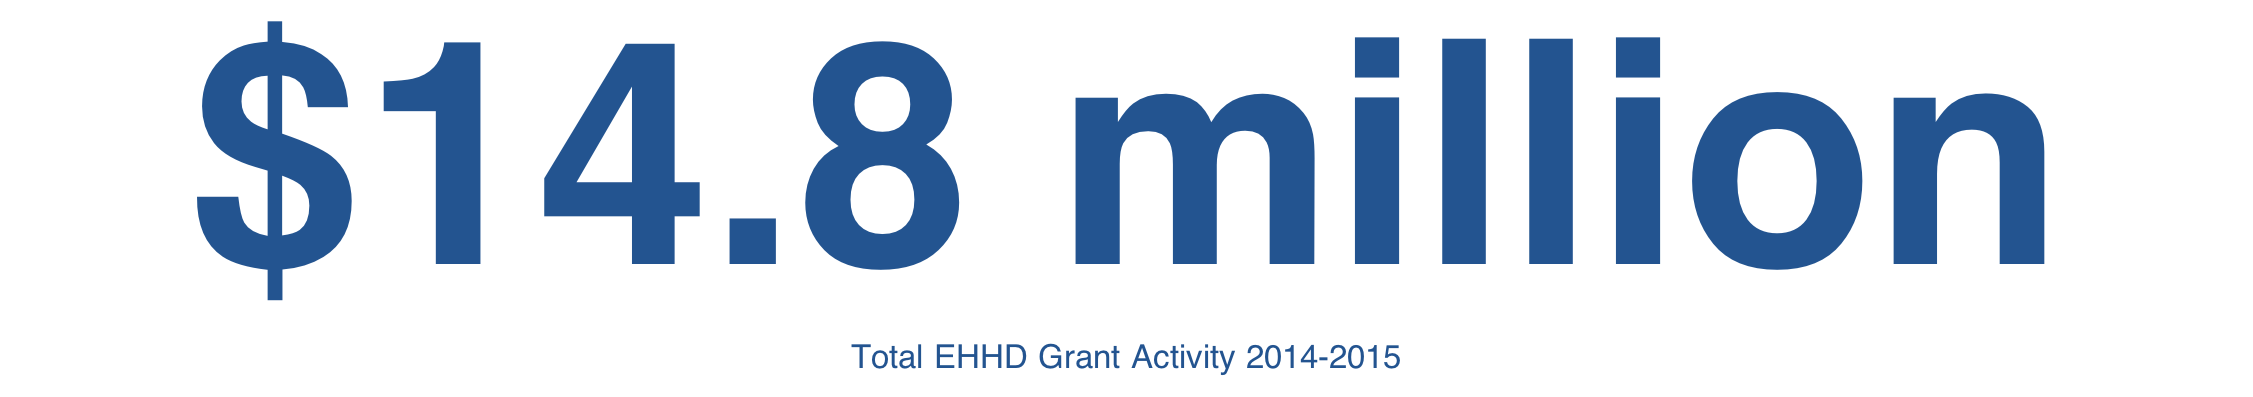 Numerical image showing EHHD total grant activity of 14.8 million USD